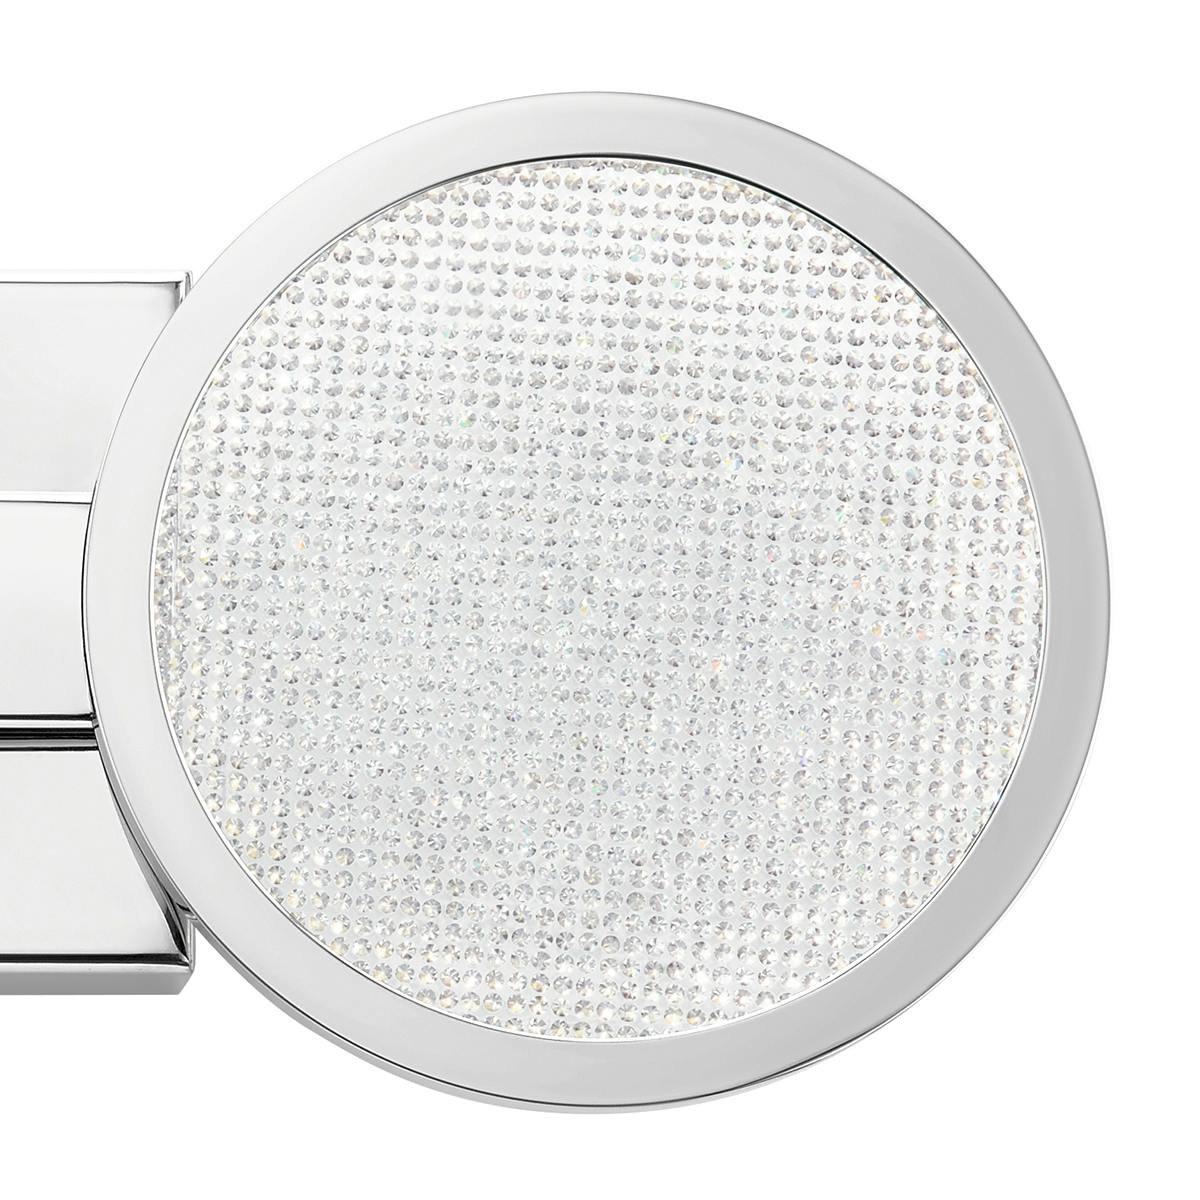 Close up view of the Delaine 3000K 2 Light Vanity Light Chrome on a white background